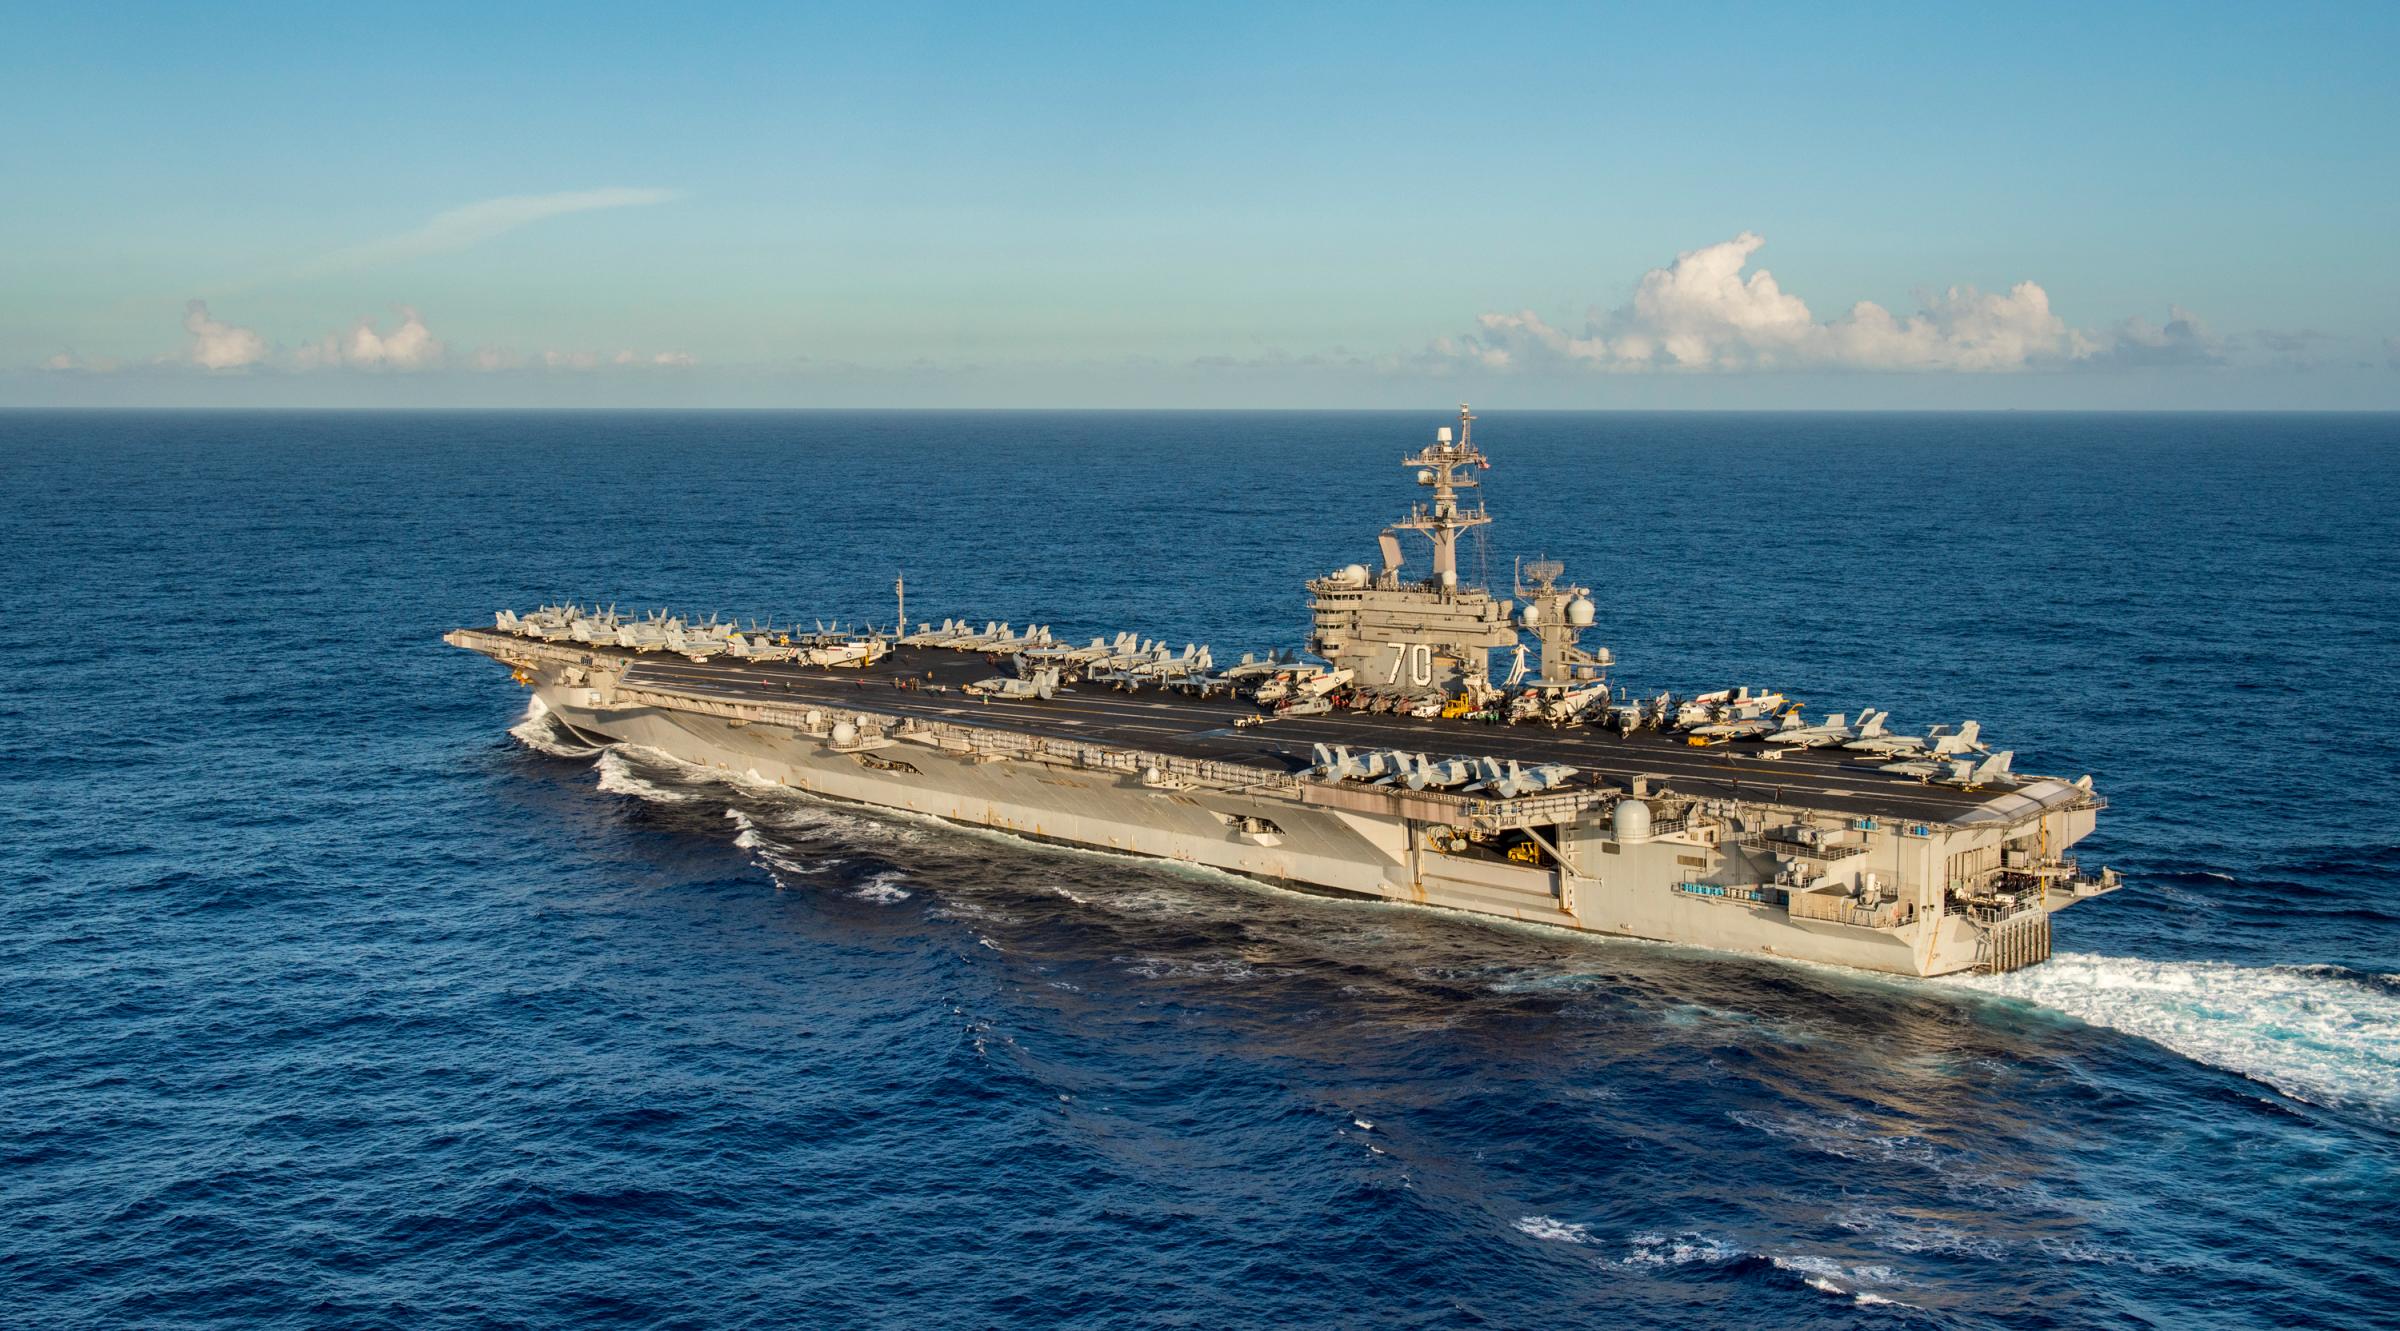 180120-N-BL637-0120 PACIFIC OCEAN (Jan. 20, 2018) Nimitz-class aircraft carrier USS Carl Vinson (CVN 70) transits the Pacific Ocean. Carl Vinson Strike Group is currently operating in the Pacific as part of a regularly scheduled deployment. (U.S. Navy Photo by Mass Communication Specialist 2nd Class Sean M. Castellano/Released)